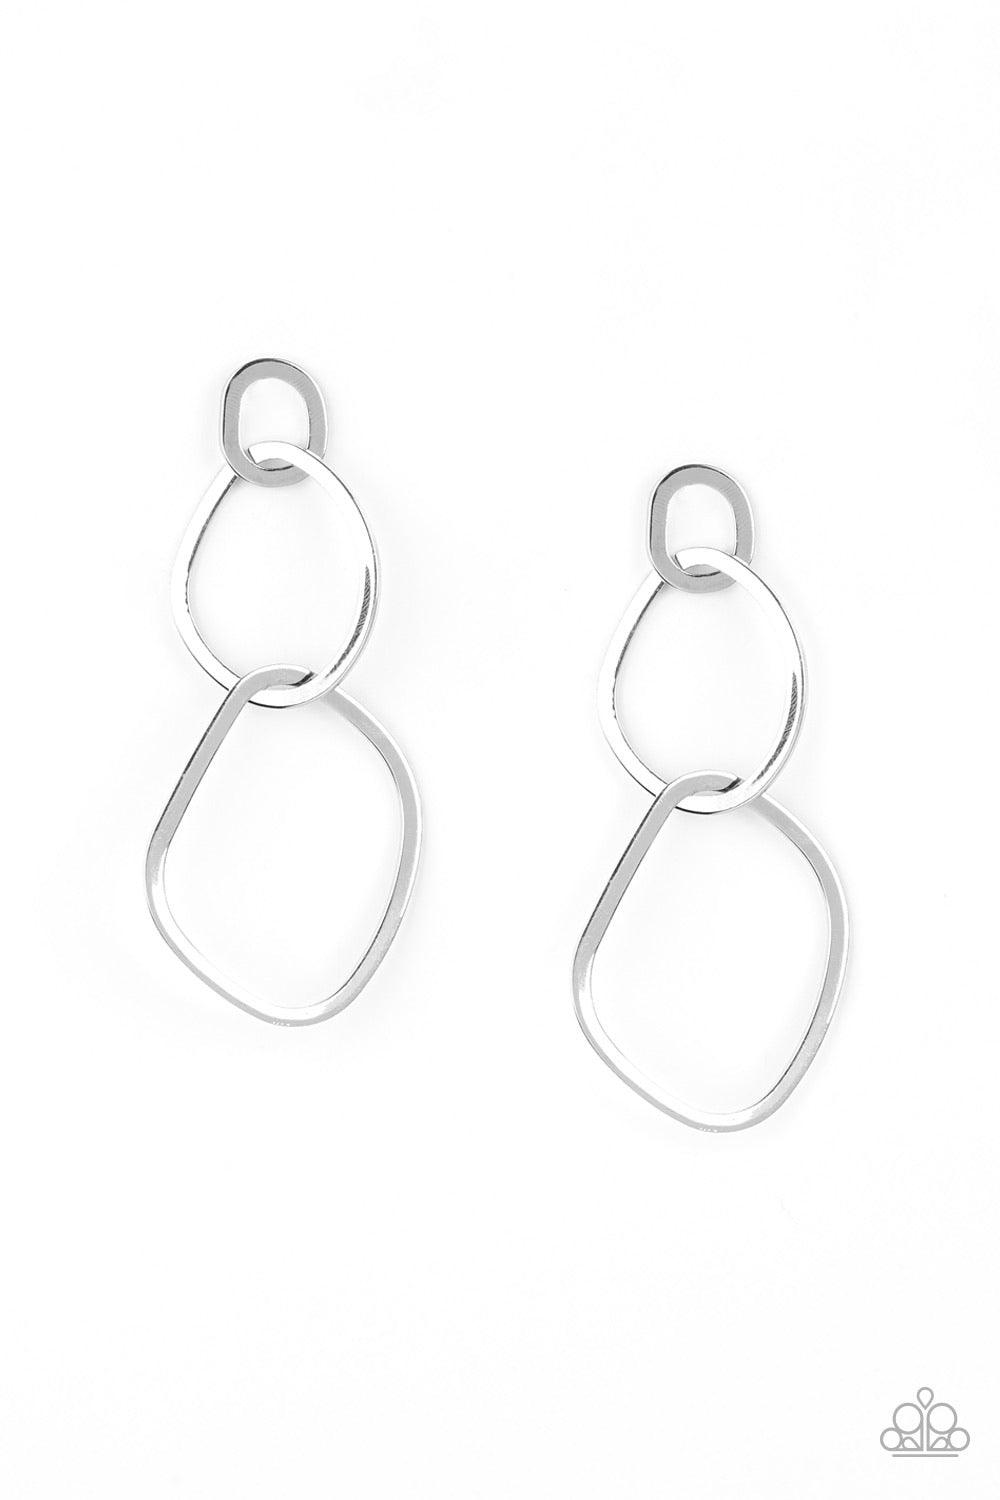 Paparazzi Accessories Twisted Trio - Silver A trio of asymmetrical silver hoops link as they tumble from the ear, coalescing into an abstract lure. Earring attaches to a standard post fitting. Sold as one pair of post earrings. Jewelry